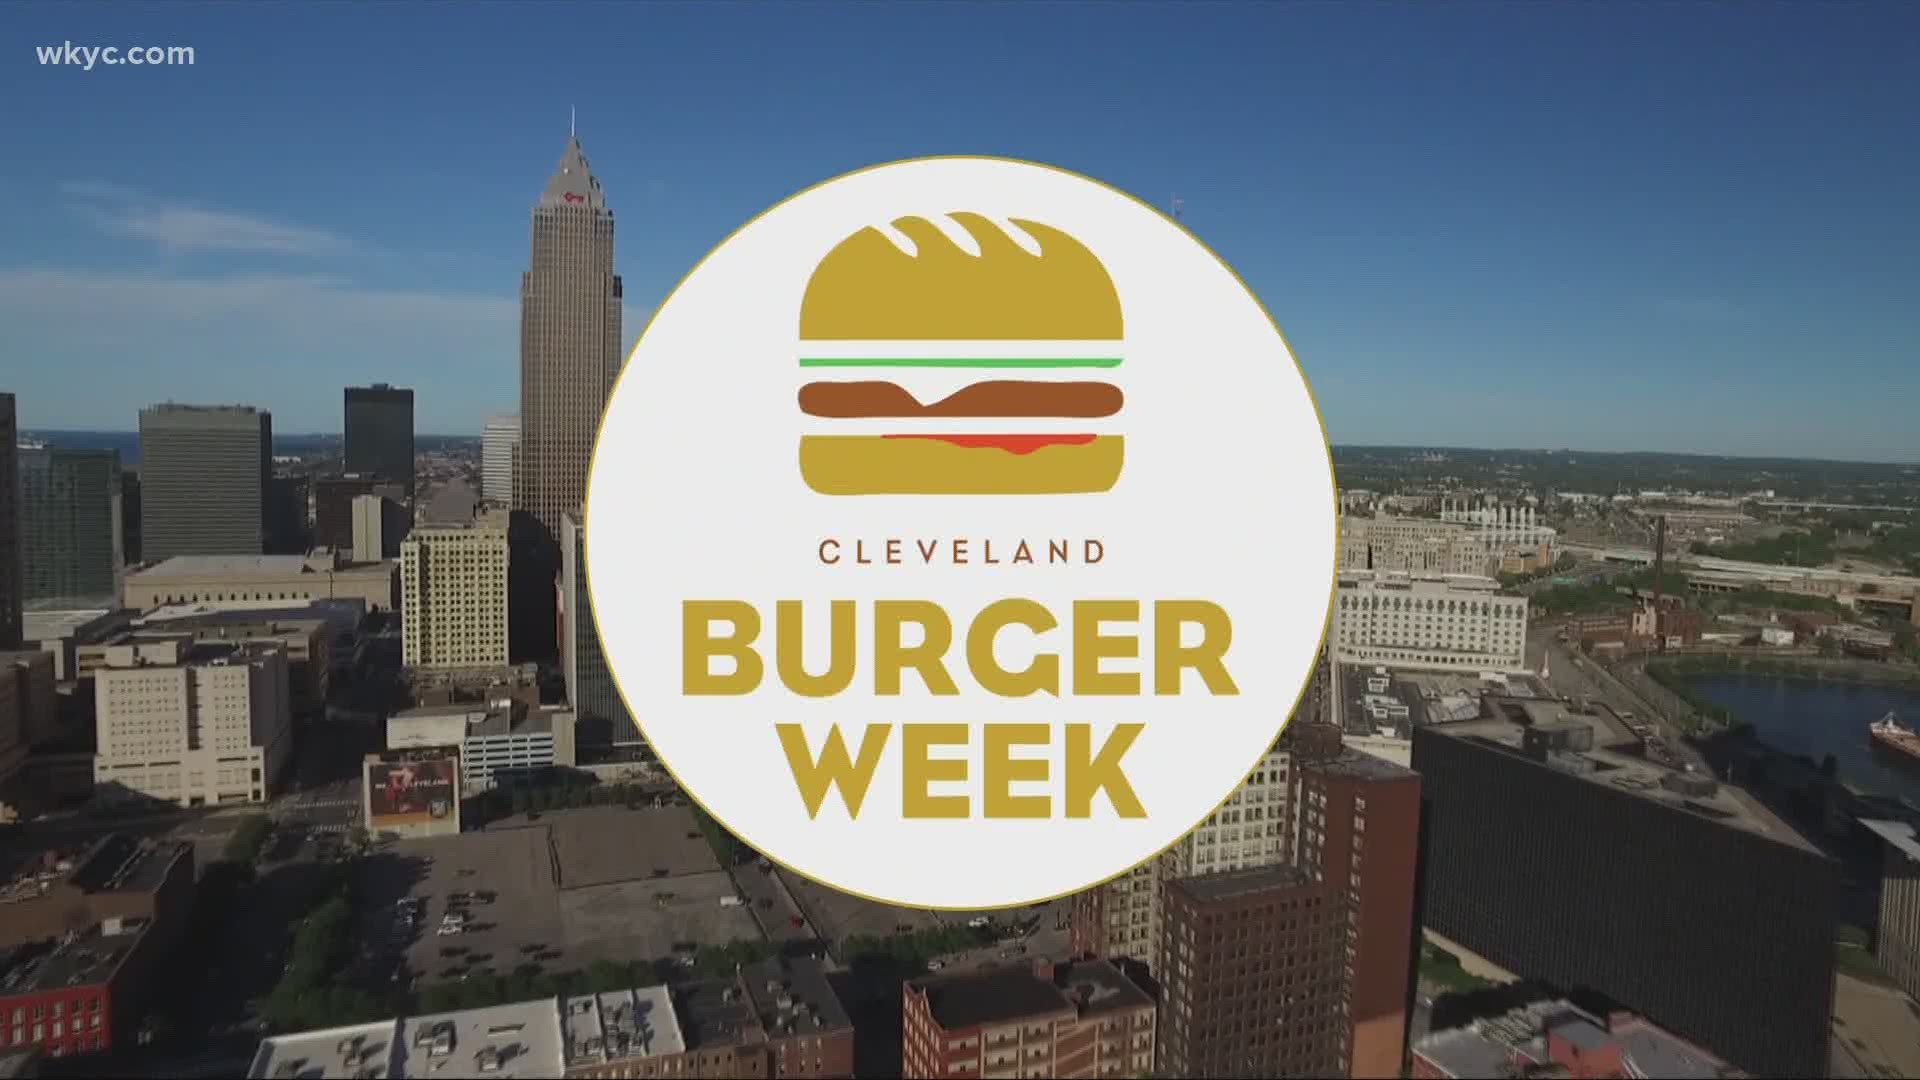 If you are craving a burger; this is your week.  Cleveland Burger Weeks kicks off tomorrow.  Lindsay Buckingham explains how the week-long food event works.